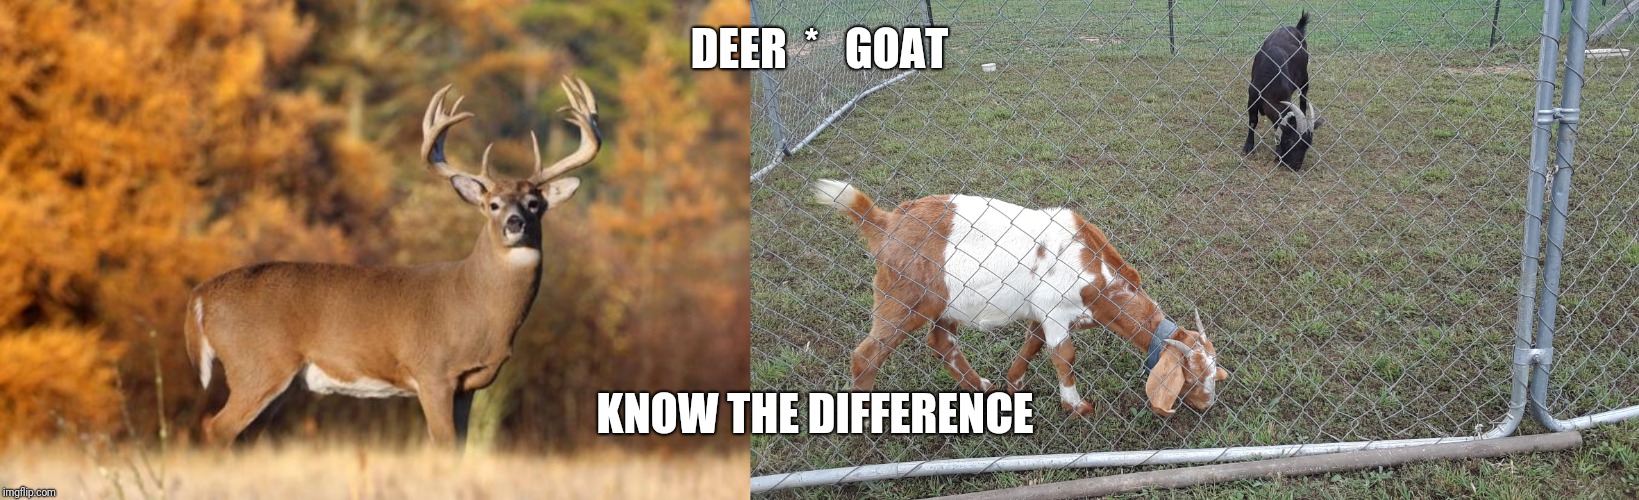 DEER  *   GOAT; KNOW THE DIFFERENCE | image tagged in whitetail deer | made w/ Imgflip meme maker